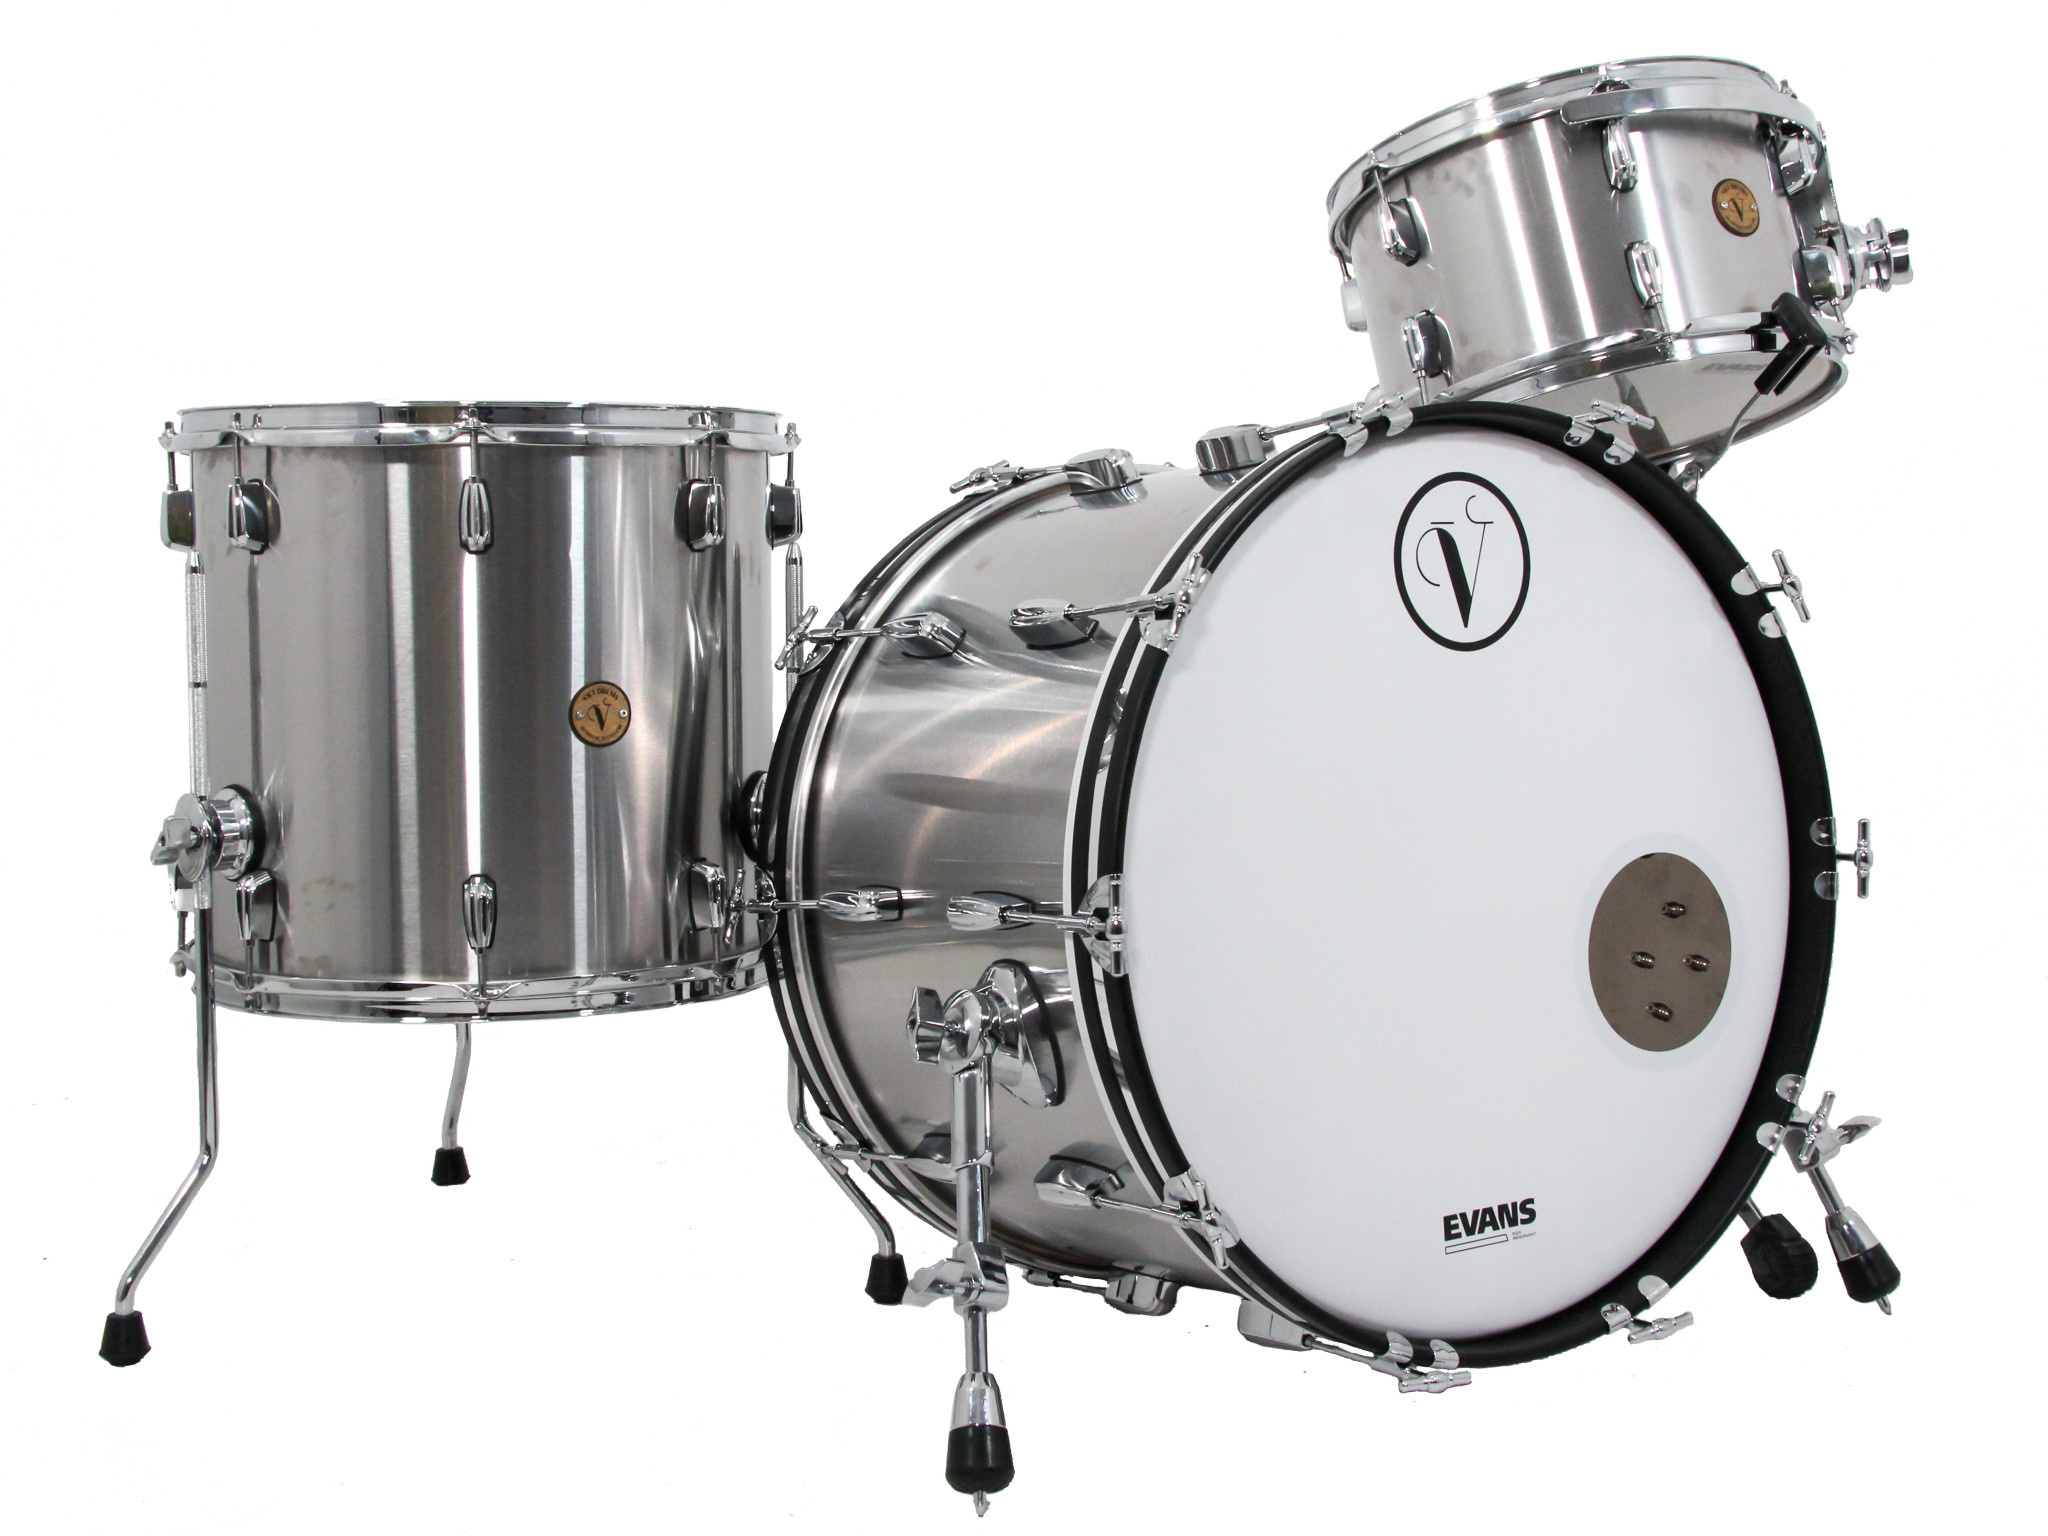 VK Drums Stainless Steel kit review